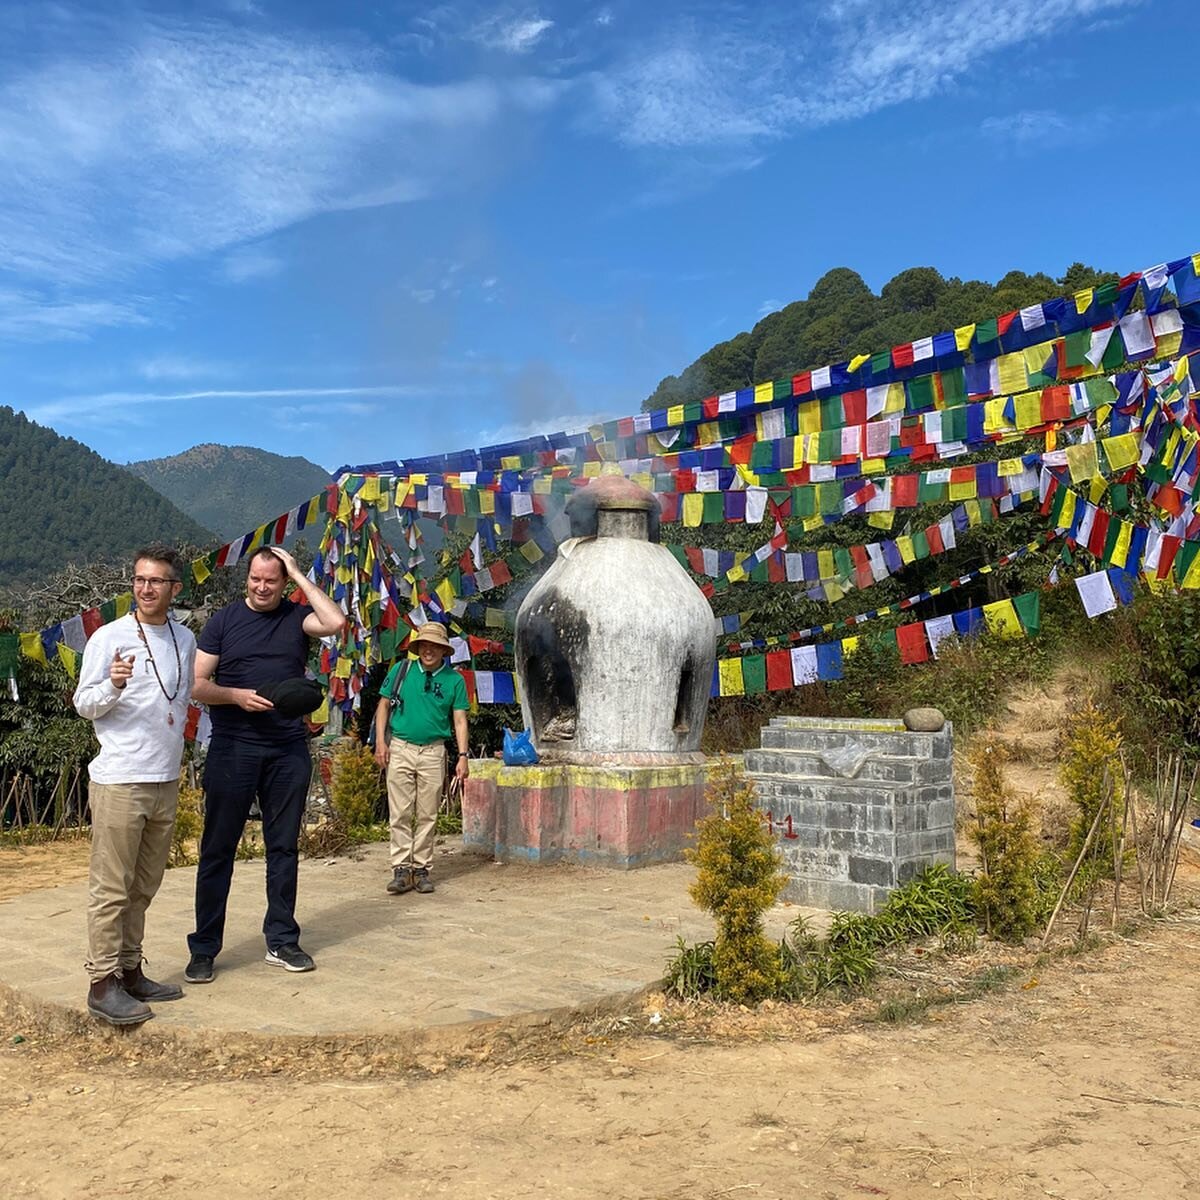 Our Nekhor pilgrimage has continued with a visit to the caves of Asura and Yanglesho, said to be equivalent to Bodh Gaya for followers for Guru Padmasambhava.
🌸
Lama Ngawang Yeshe, who has lived and mediated here since he was a young boy, recounted 